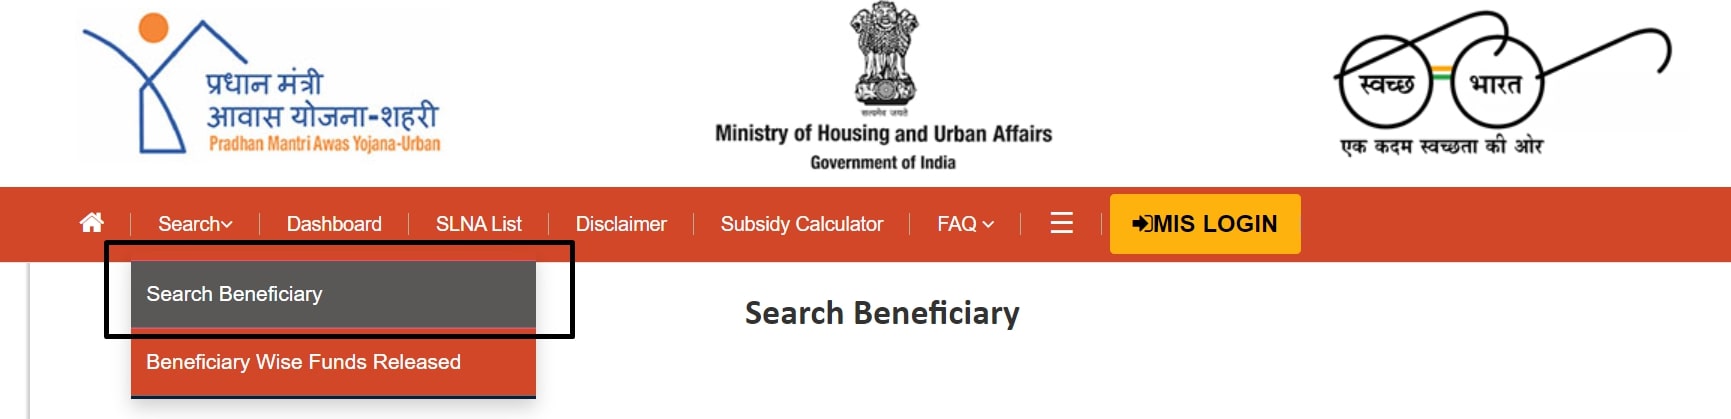 Search Beneficiary